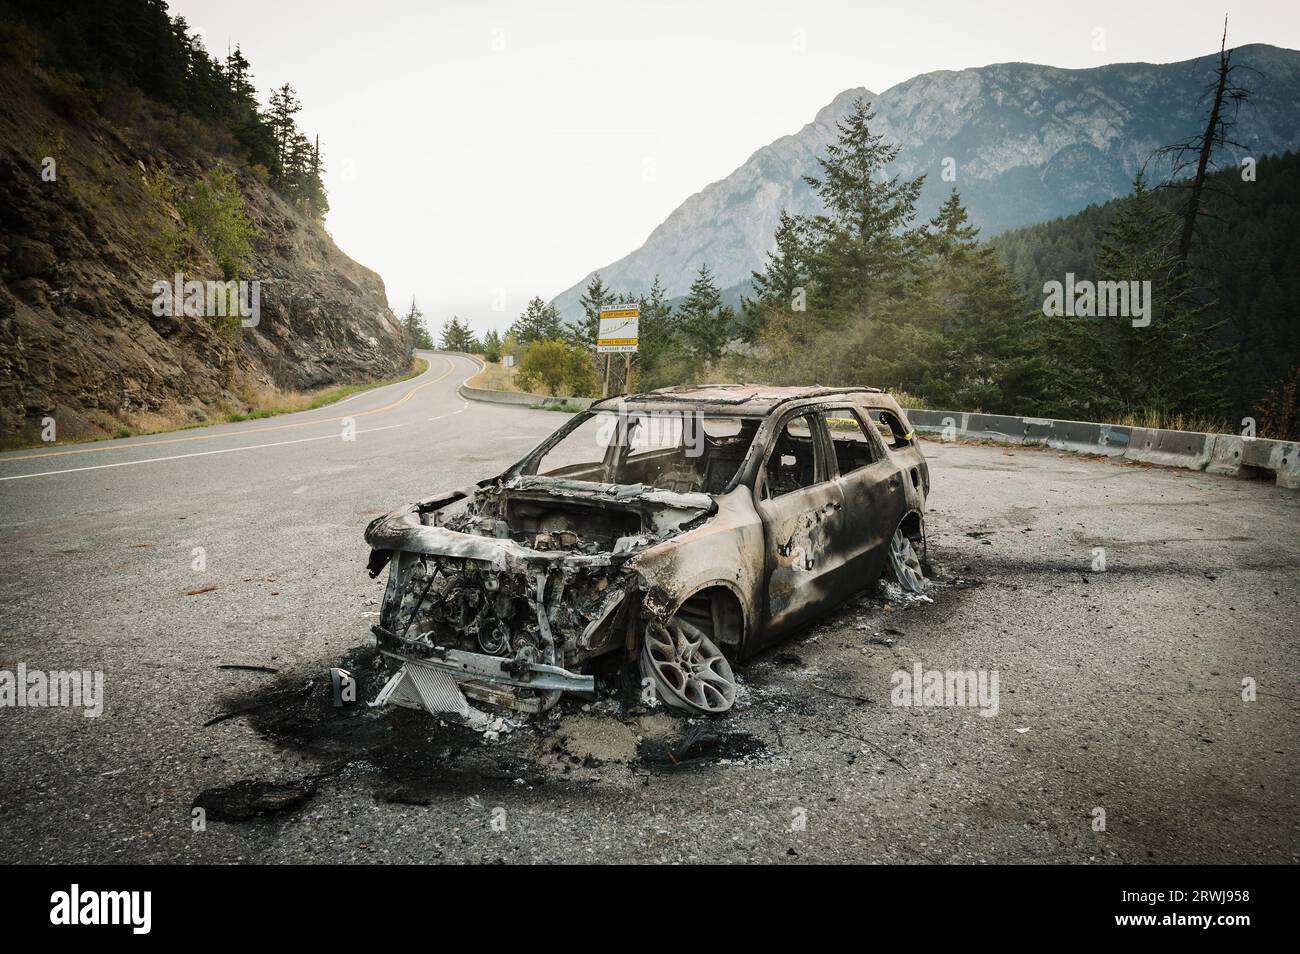 A burned out car on the side of the Duffy Lake Road between Pemberton and Lillooet BC.  Vehicle fires are common on the steep winding highway. Stock Photo